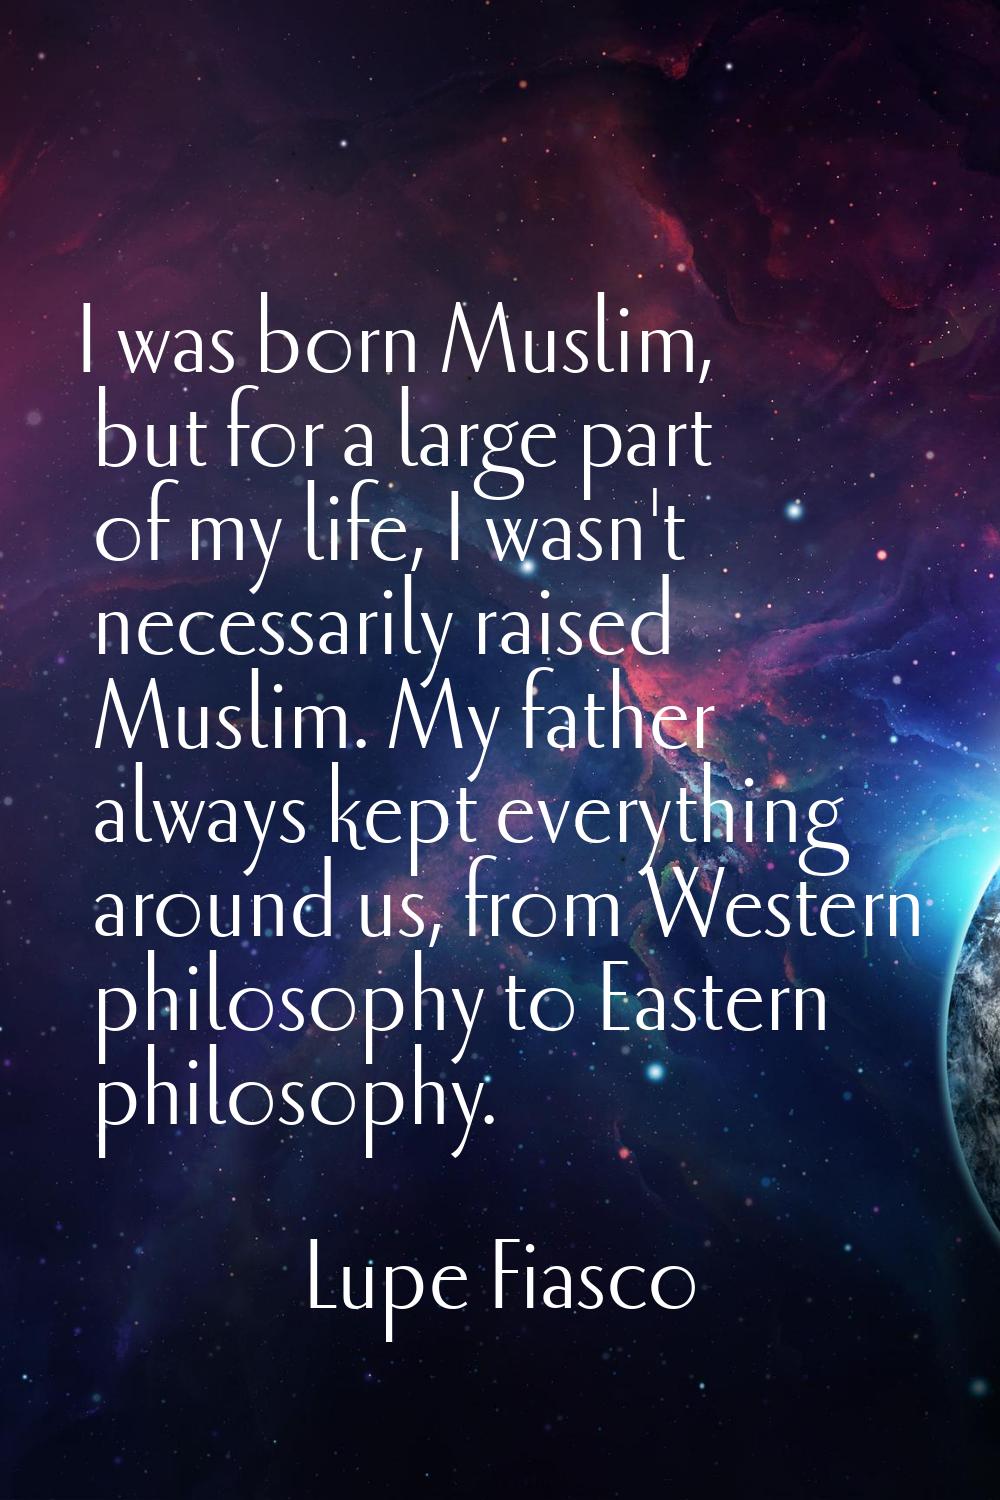 I was born Muslim, but for a large part of my life, I wasn't necessarily raised Muslim. My father a